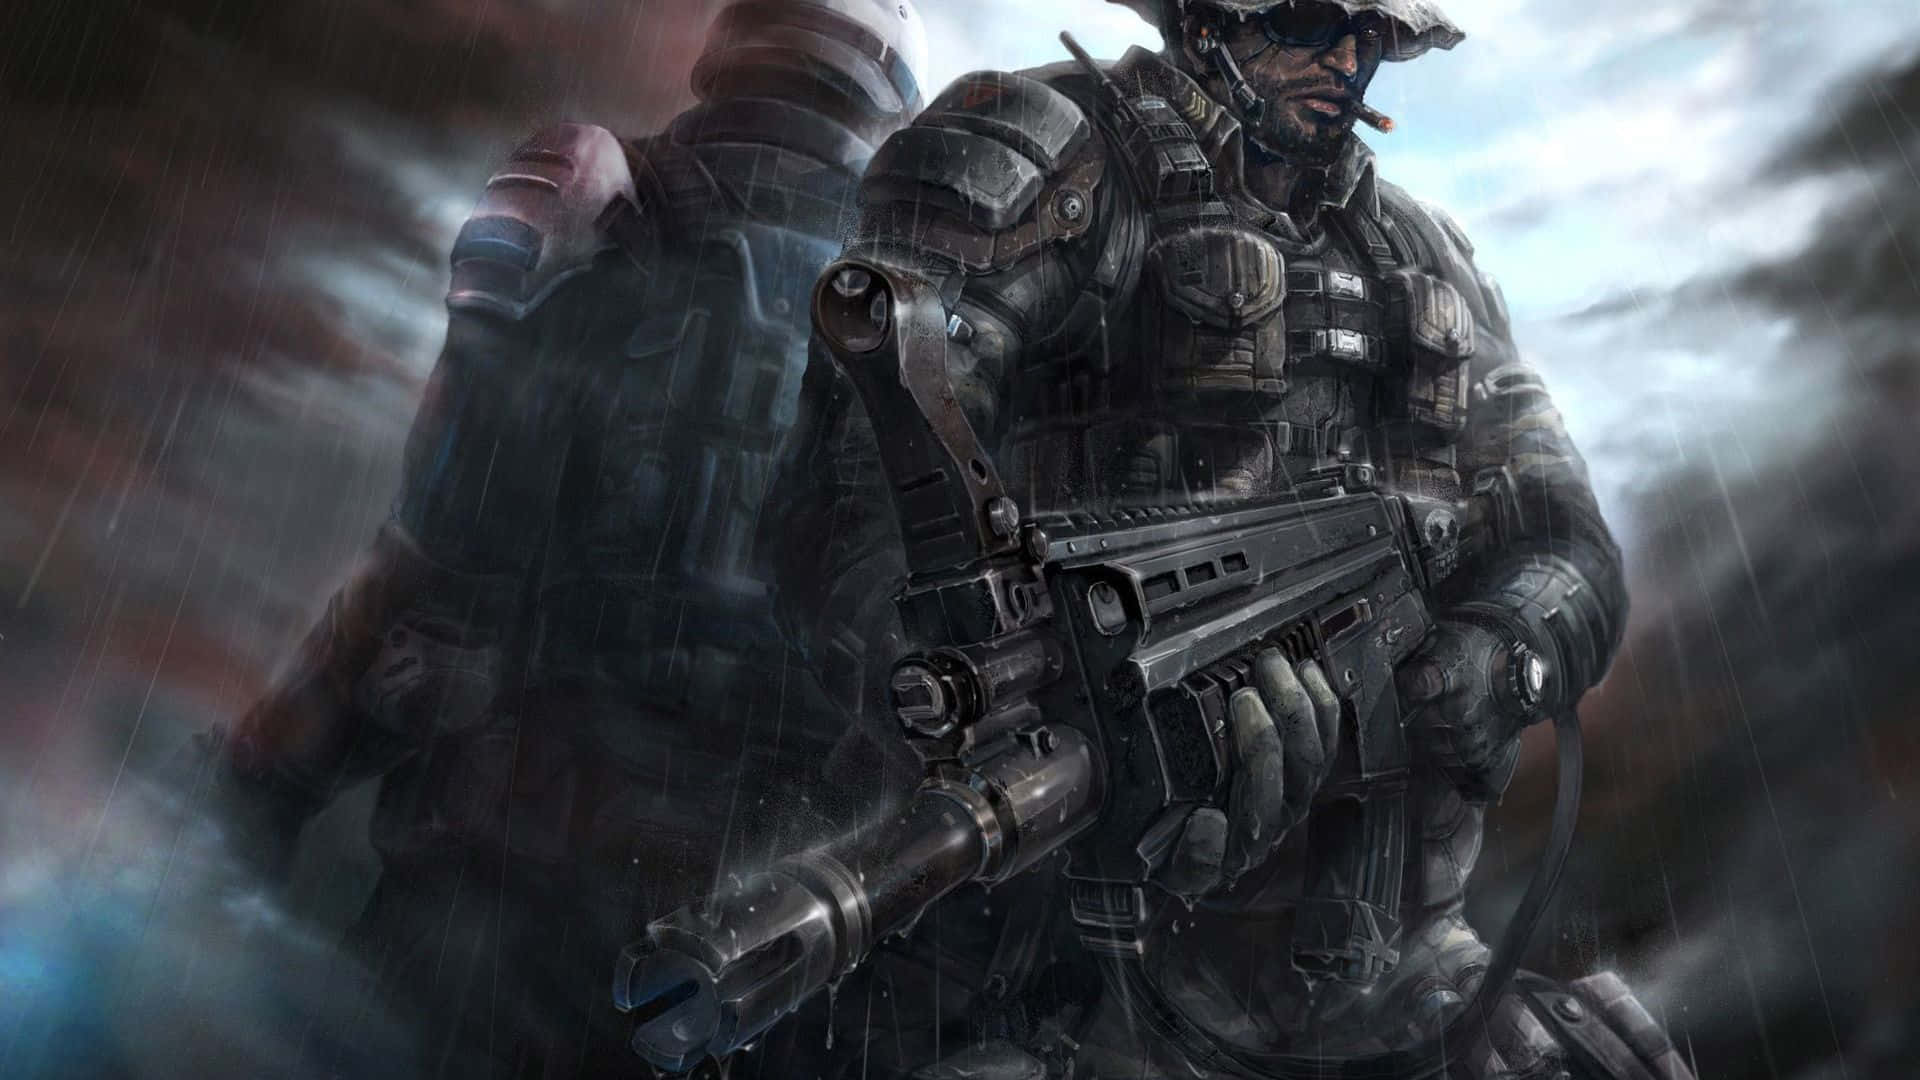 Intense Call of Duty Soldiers Ready for Battle Wallpaper